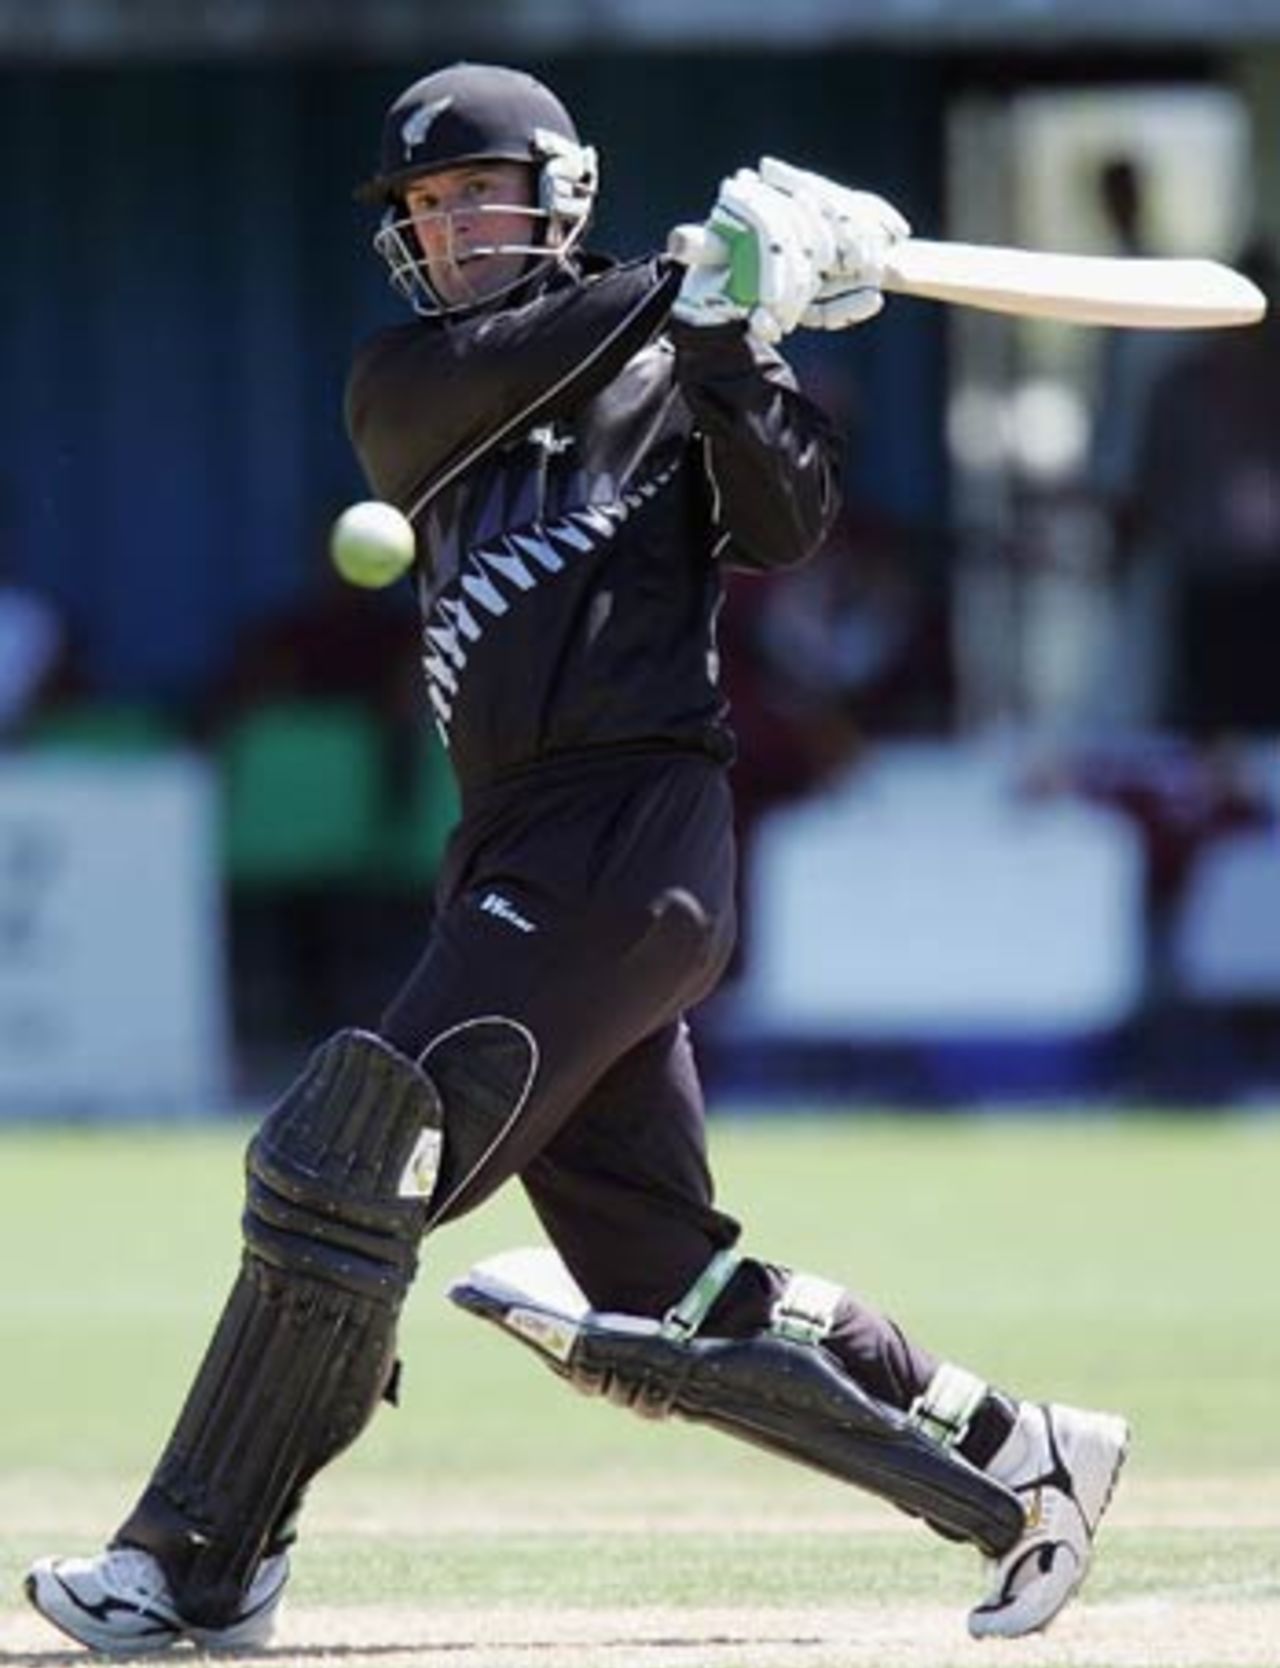 Nathan Astle unleashes a fierce pull, New Zealand v West Indies, 4th ODI, Napier, March 1, 2006